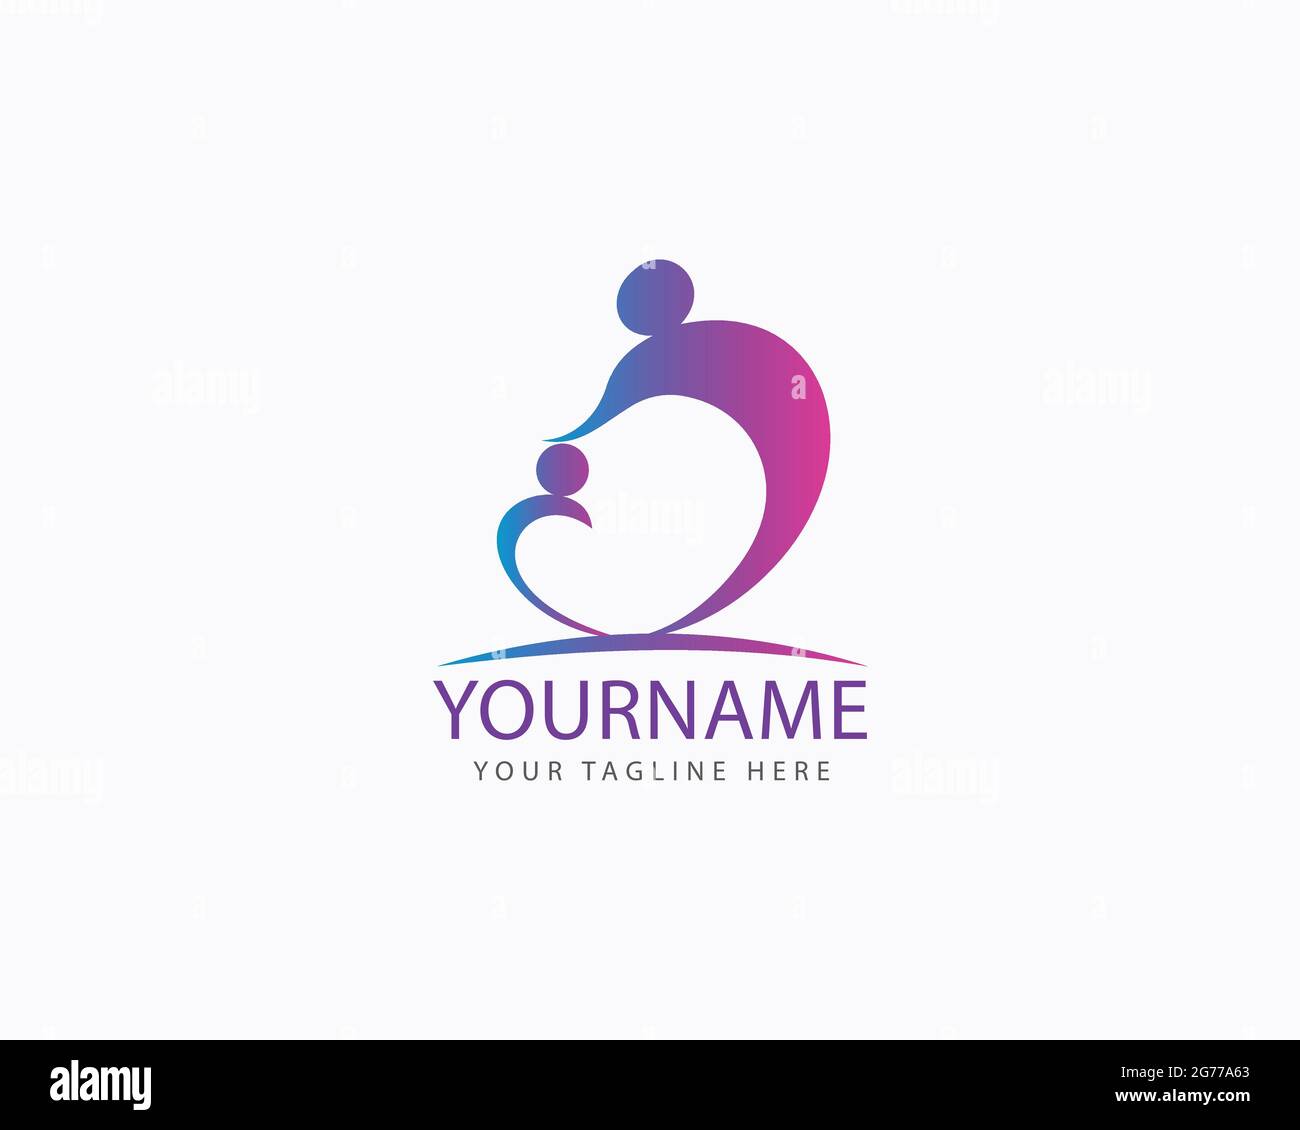 Charity people human logo design full vector and easy to edit and customize, compatible with almost illustrator version Stock Vector